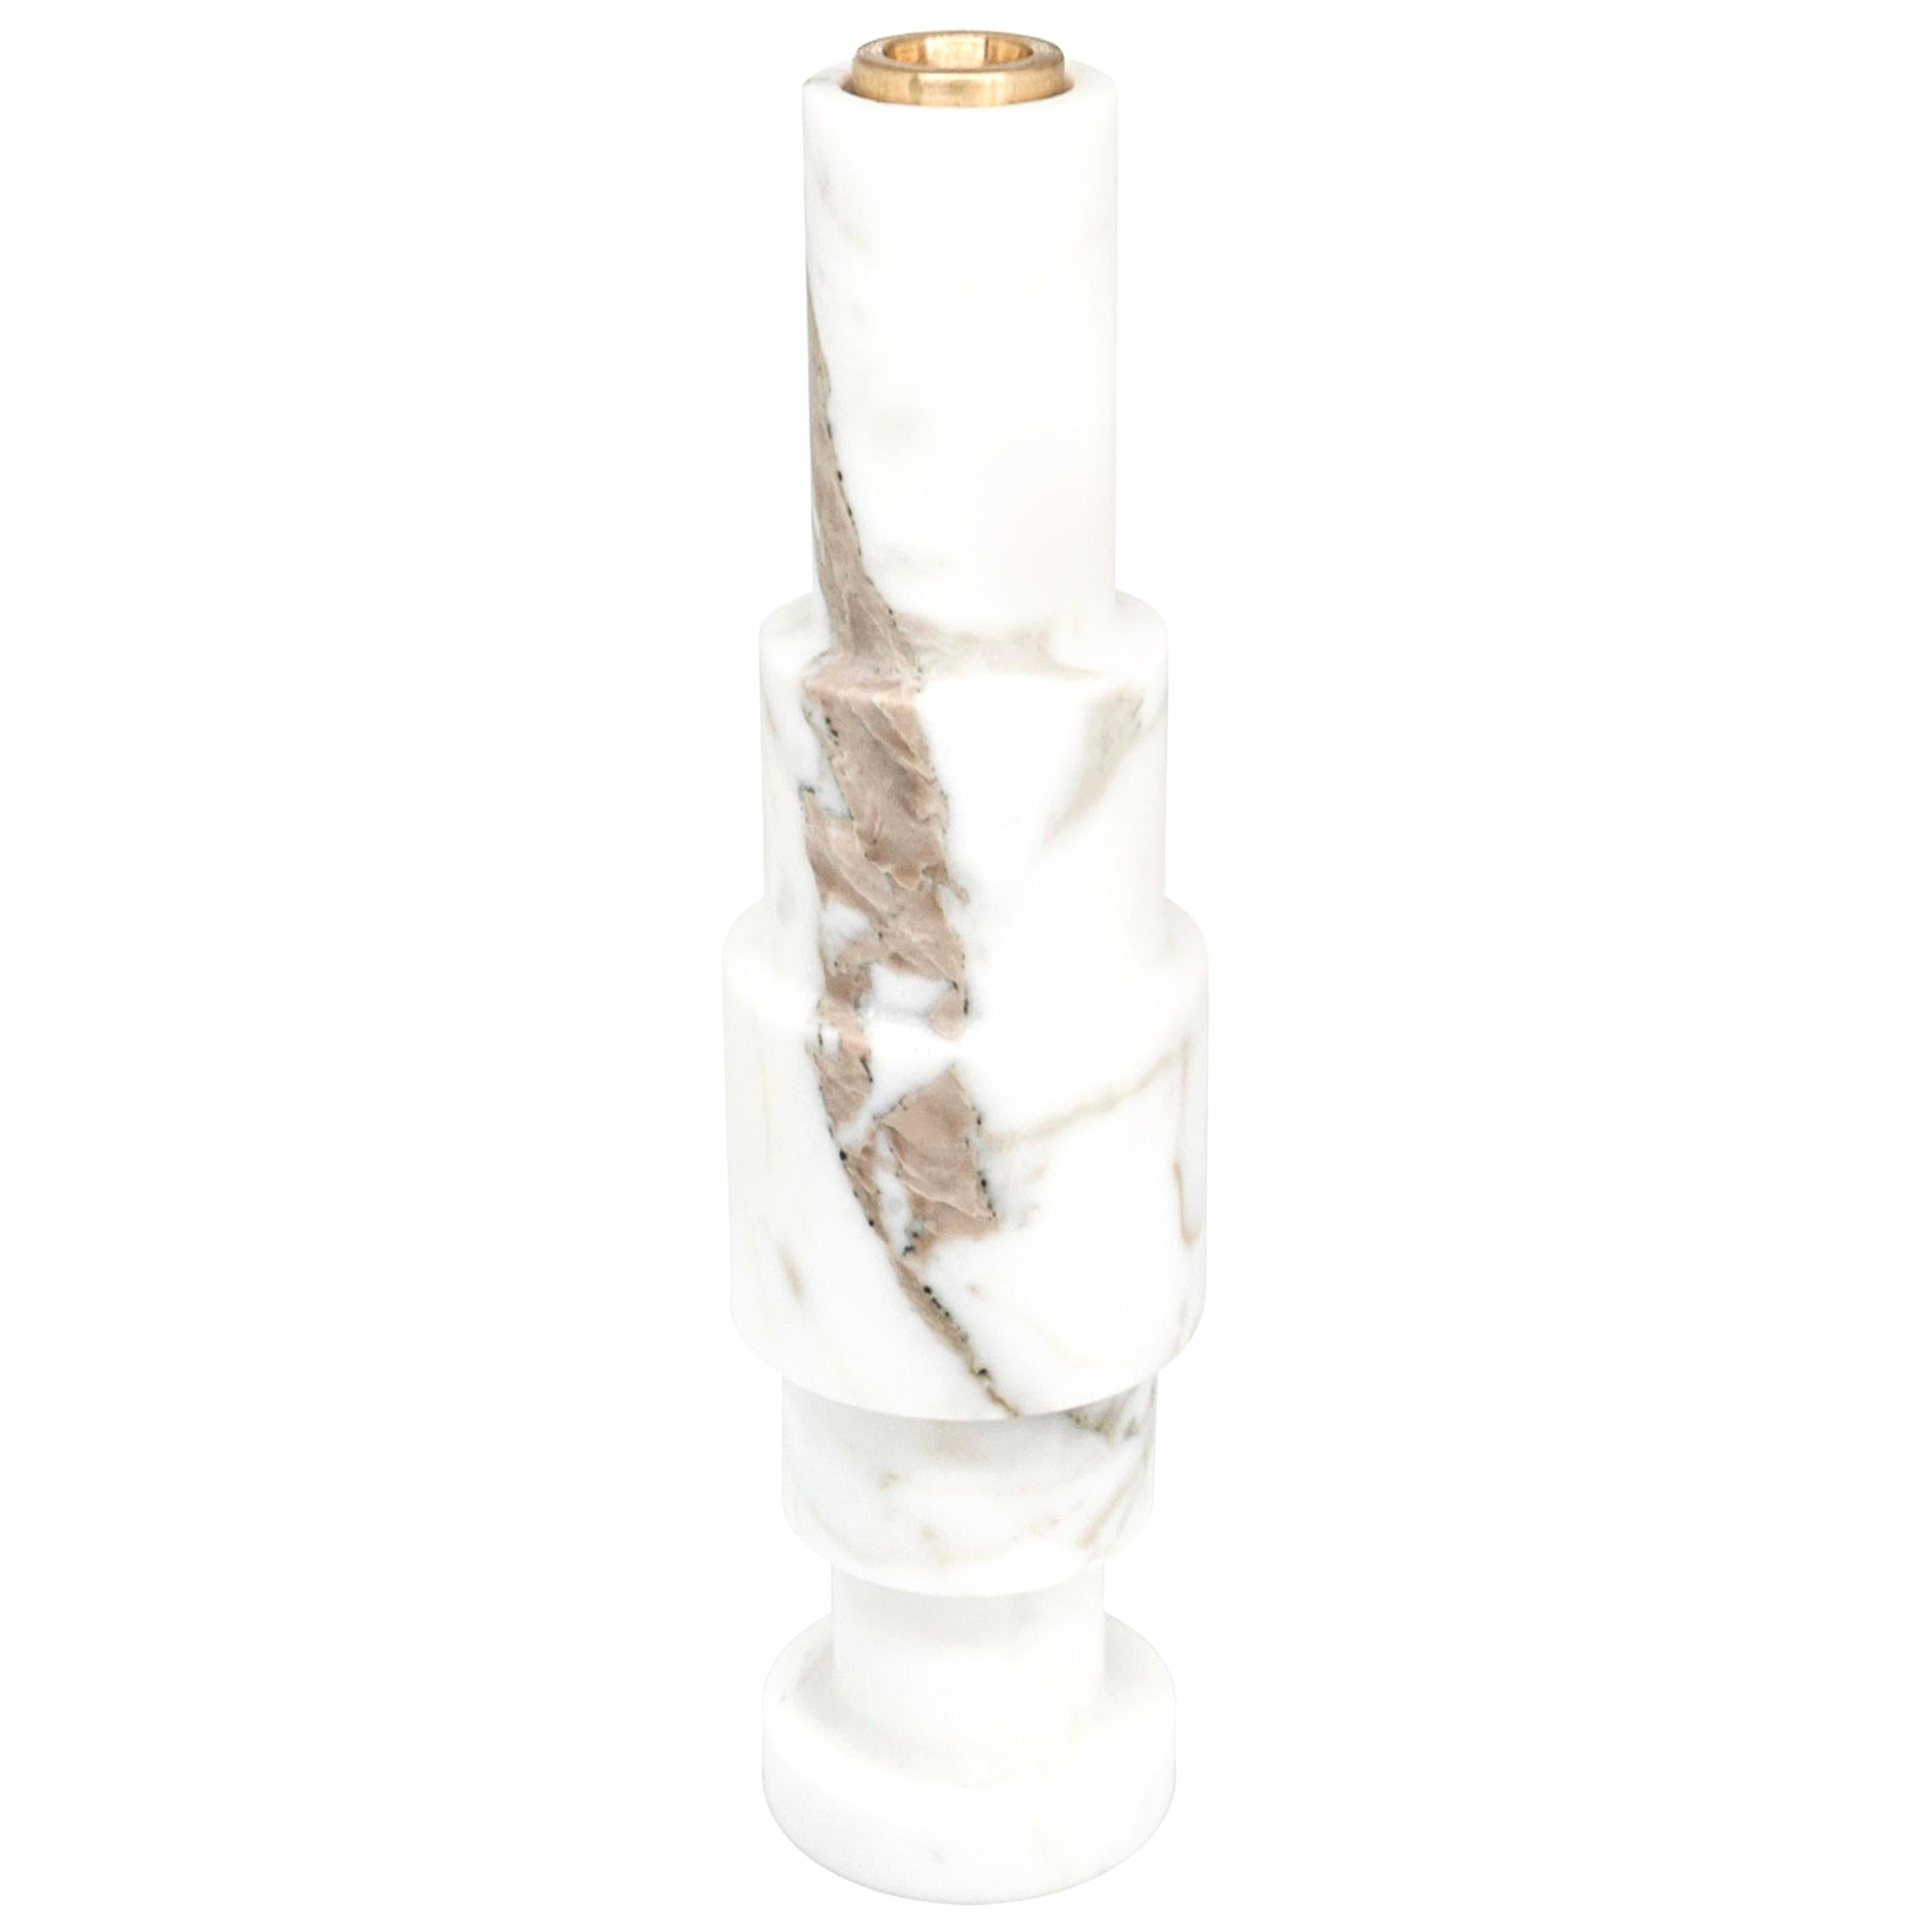 Handmade High Squared Unicolor Candleholder in White Carrara Marble and Brass